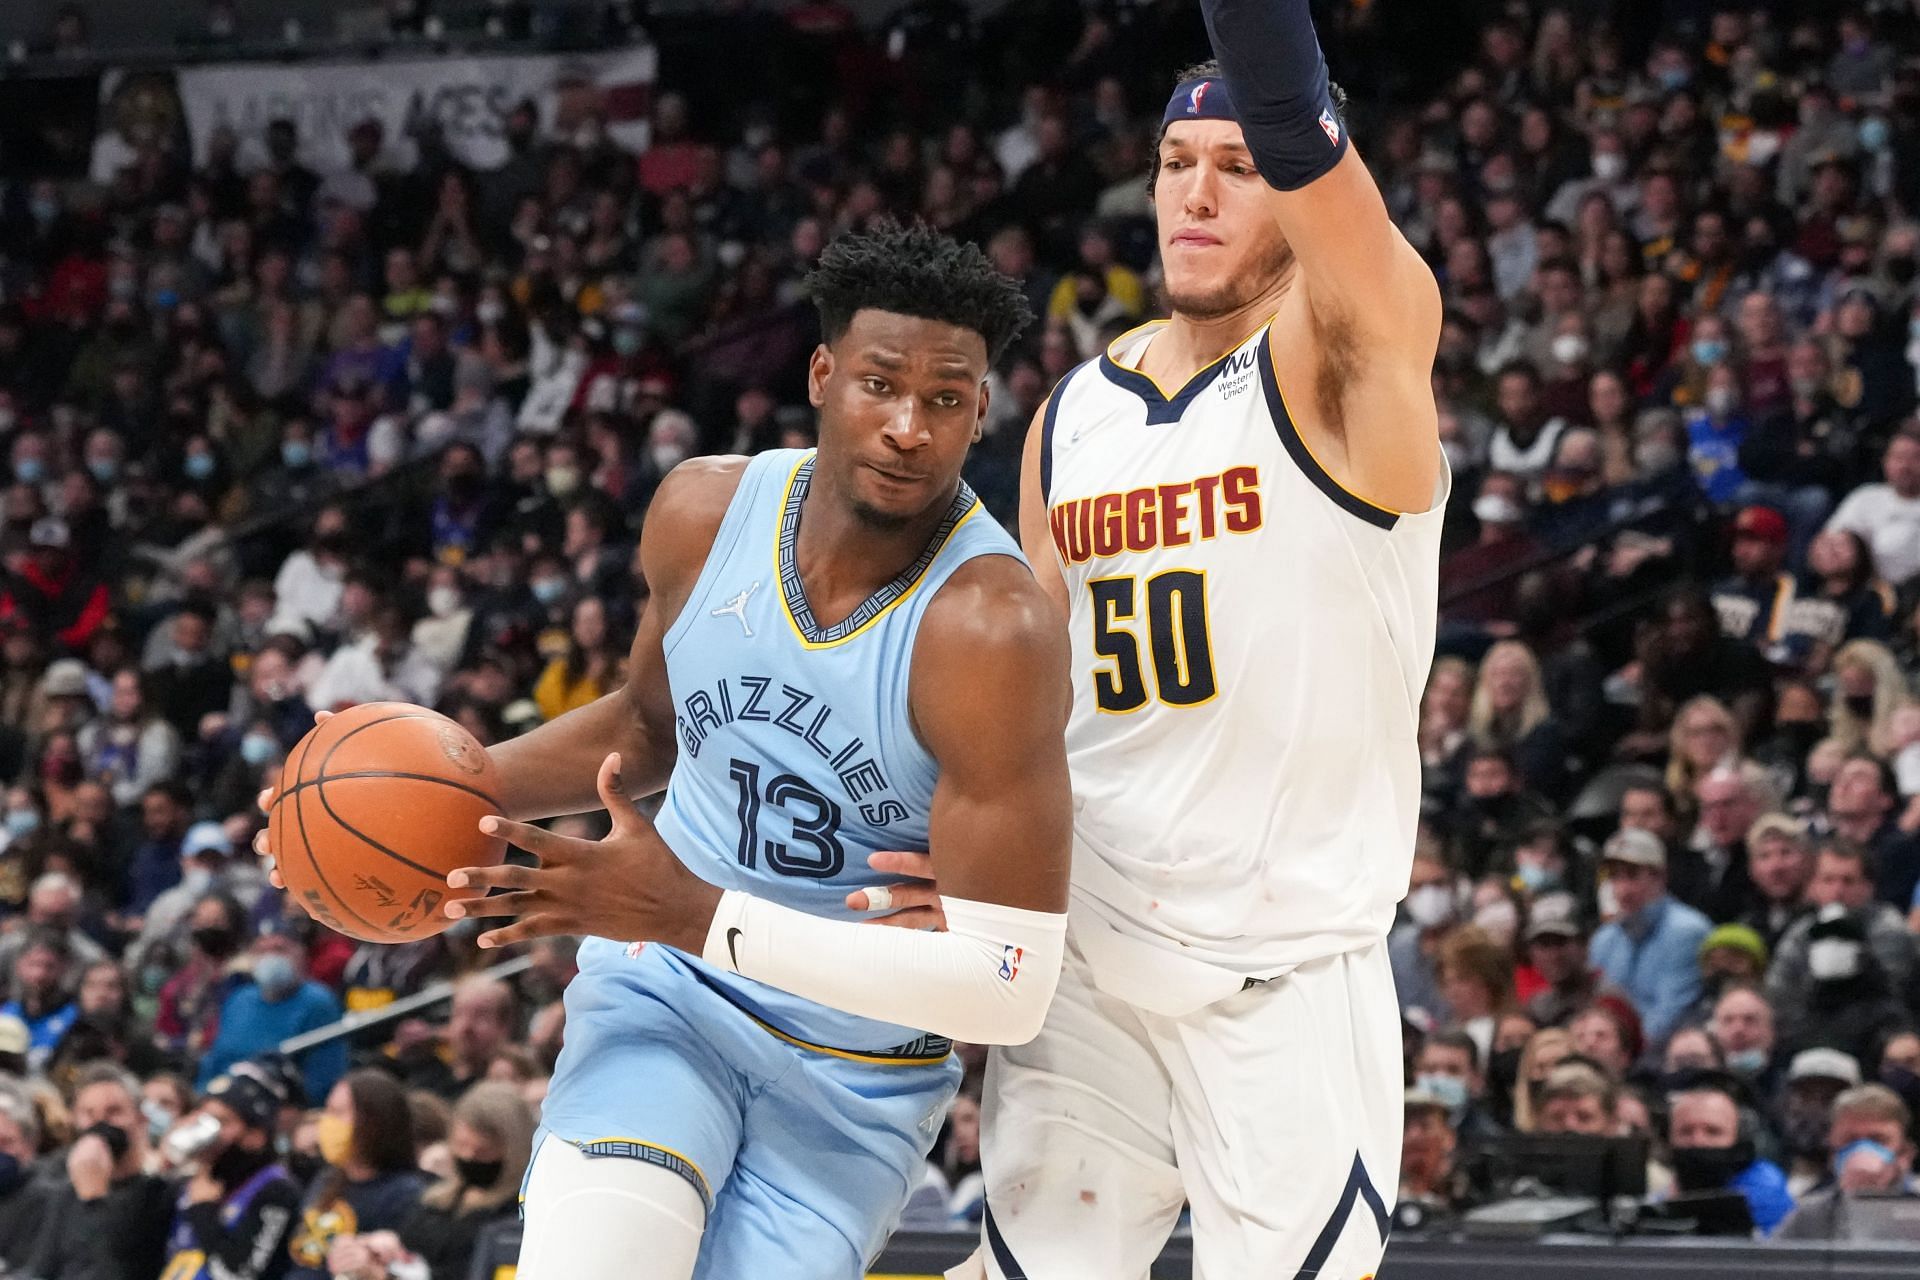 The Denver Nuggets will host the Memphis Grizzlies on April 7th